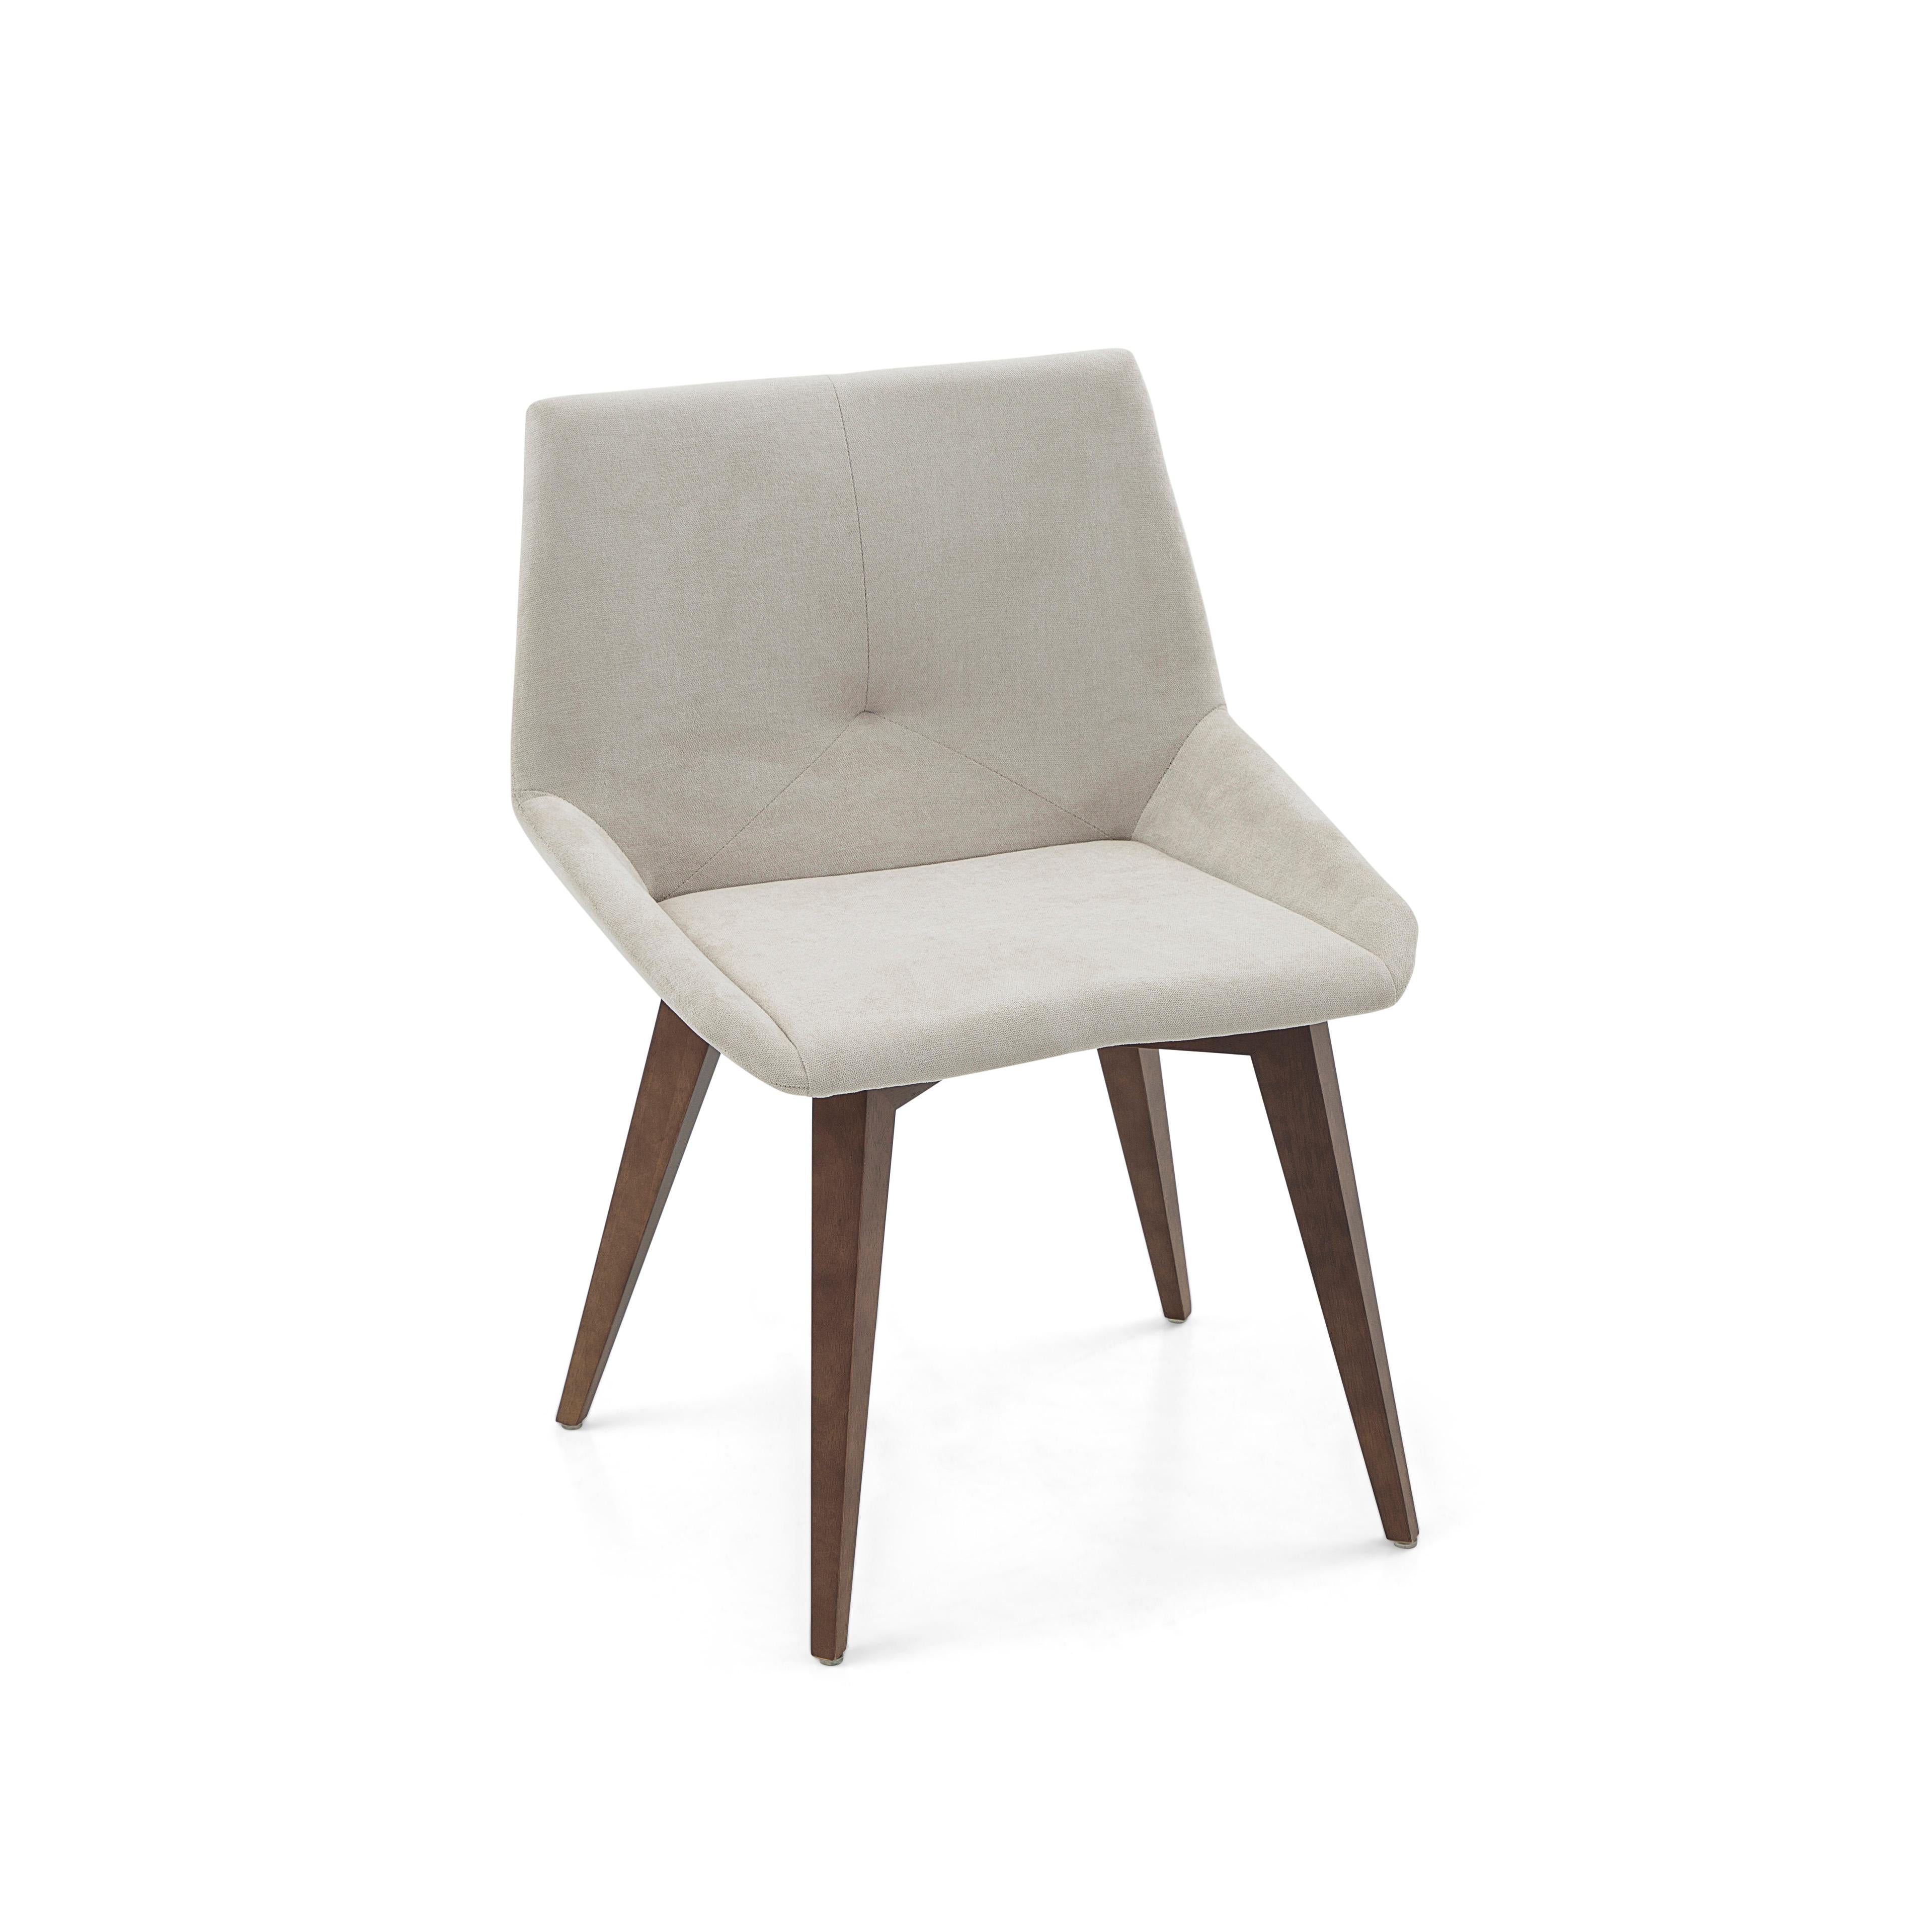 Uultis Design Dining Room Chairs